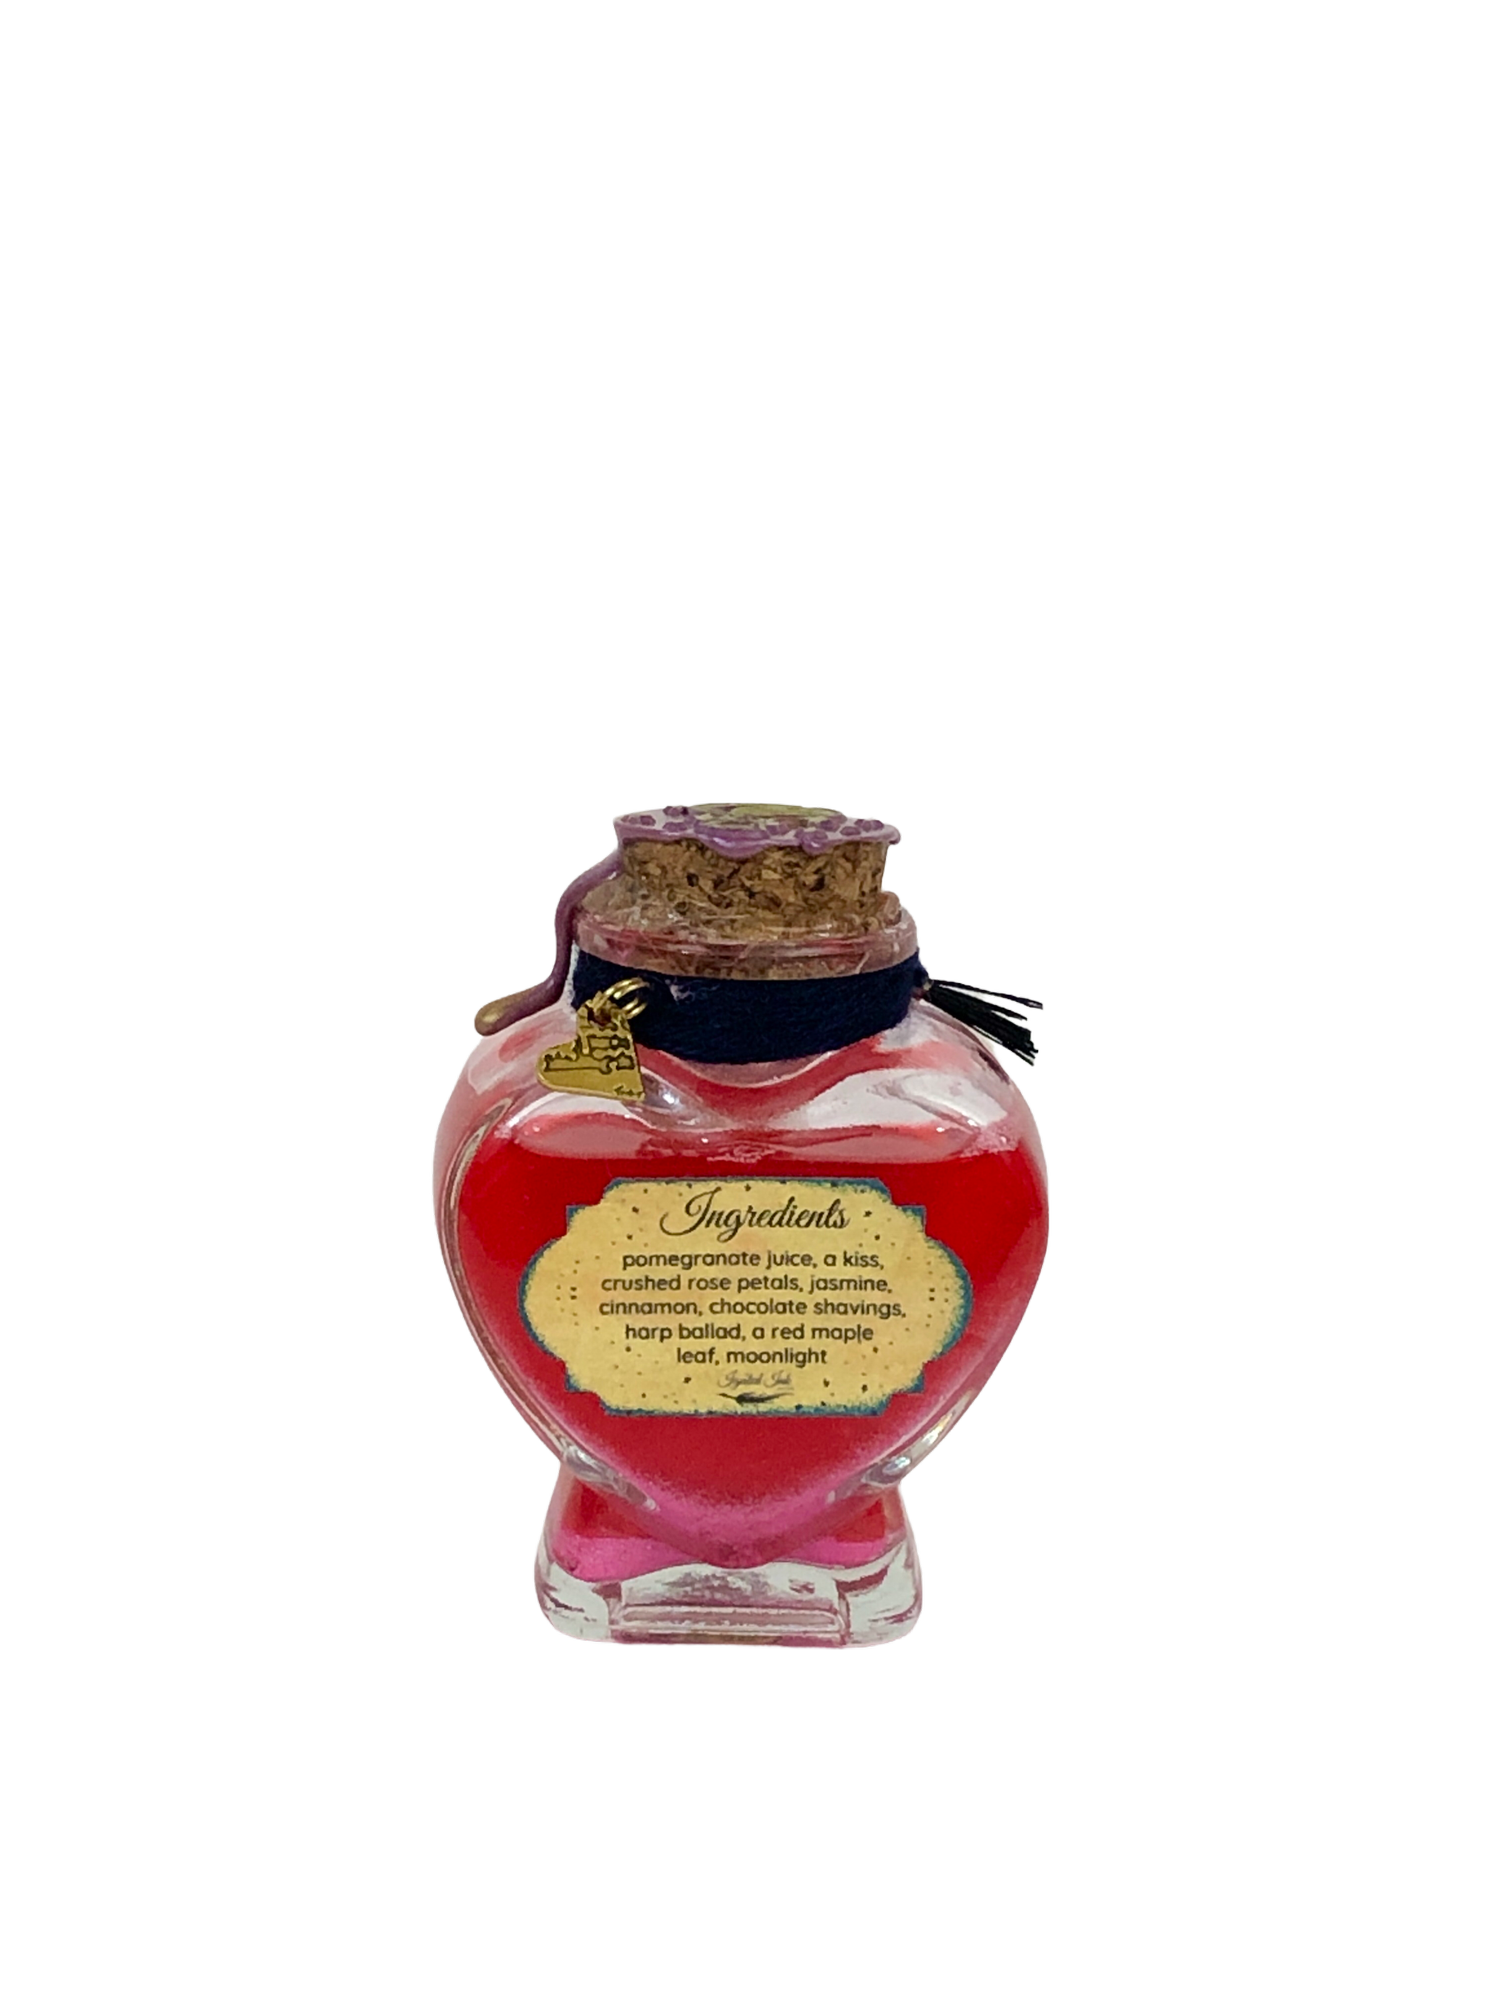 Love Potion Candle  cranberry tea + thyme – Amera's Garden